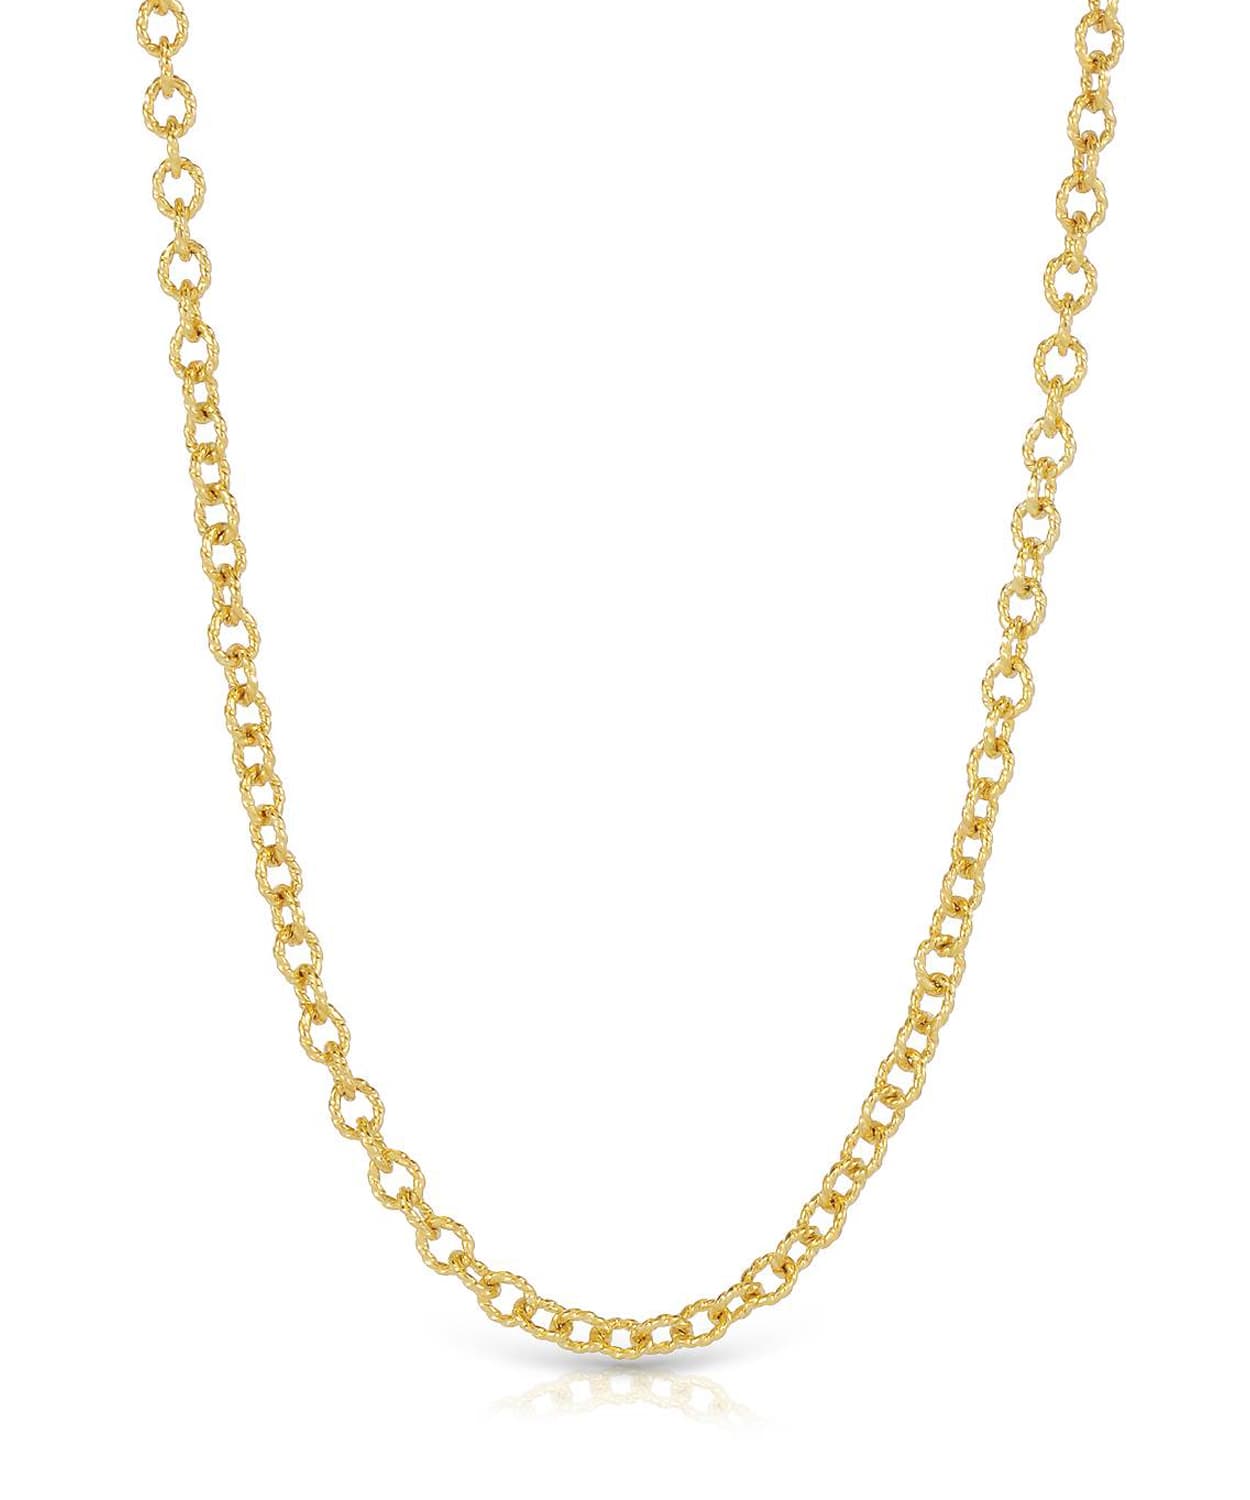 1.6mm 14k Yellow Gold Textured Link Chain View 1